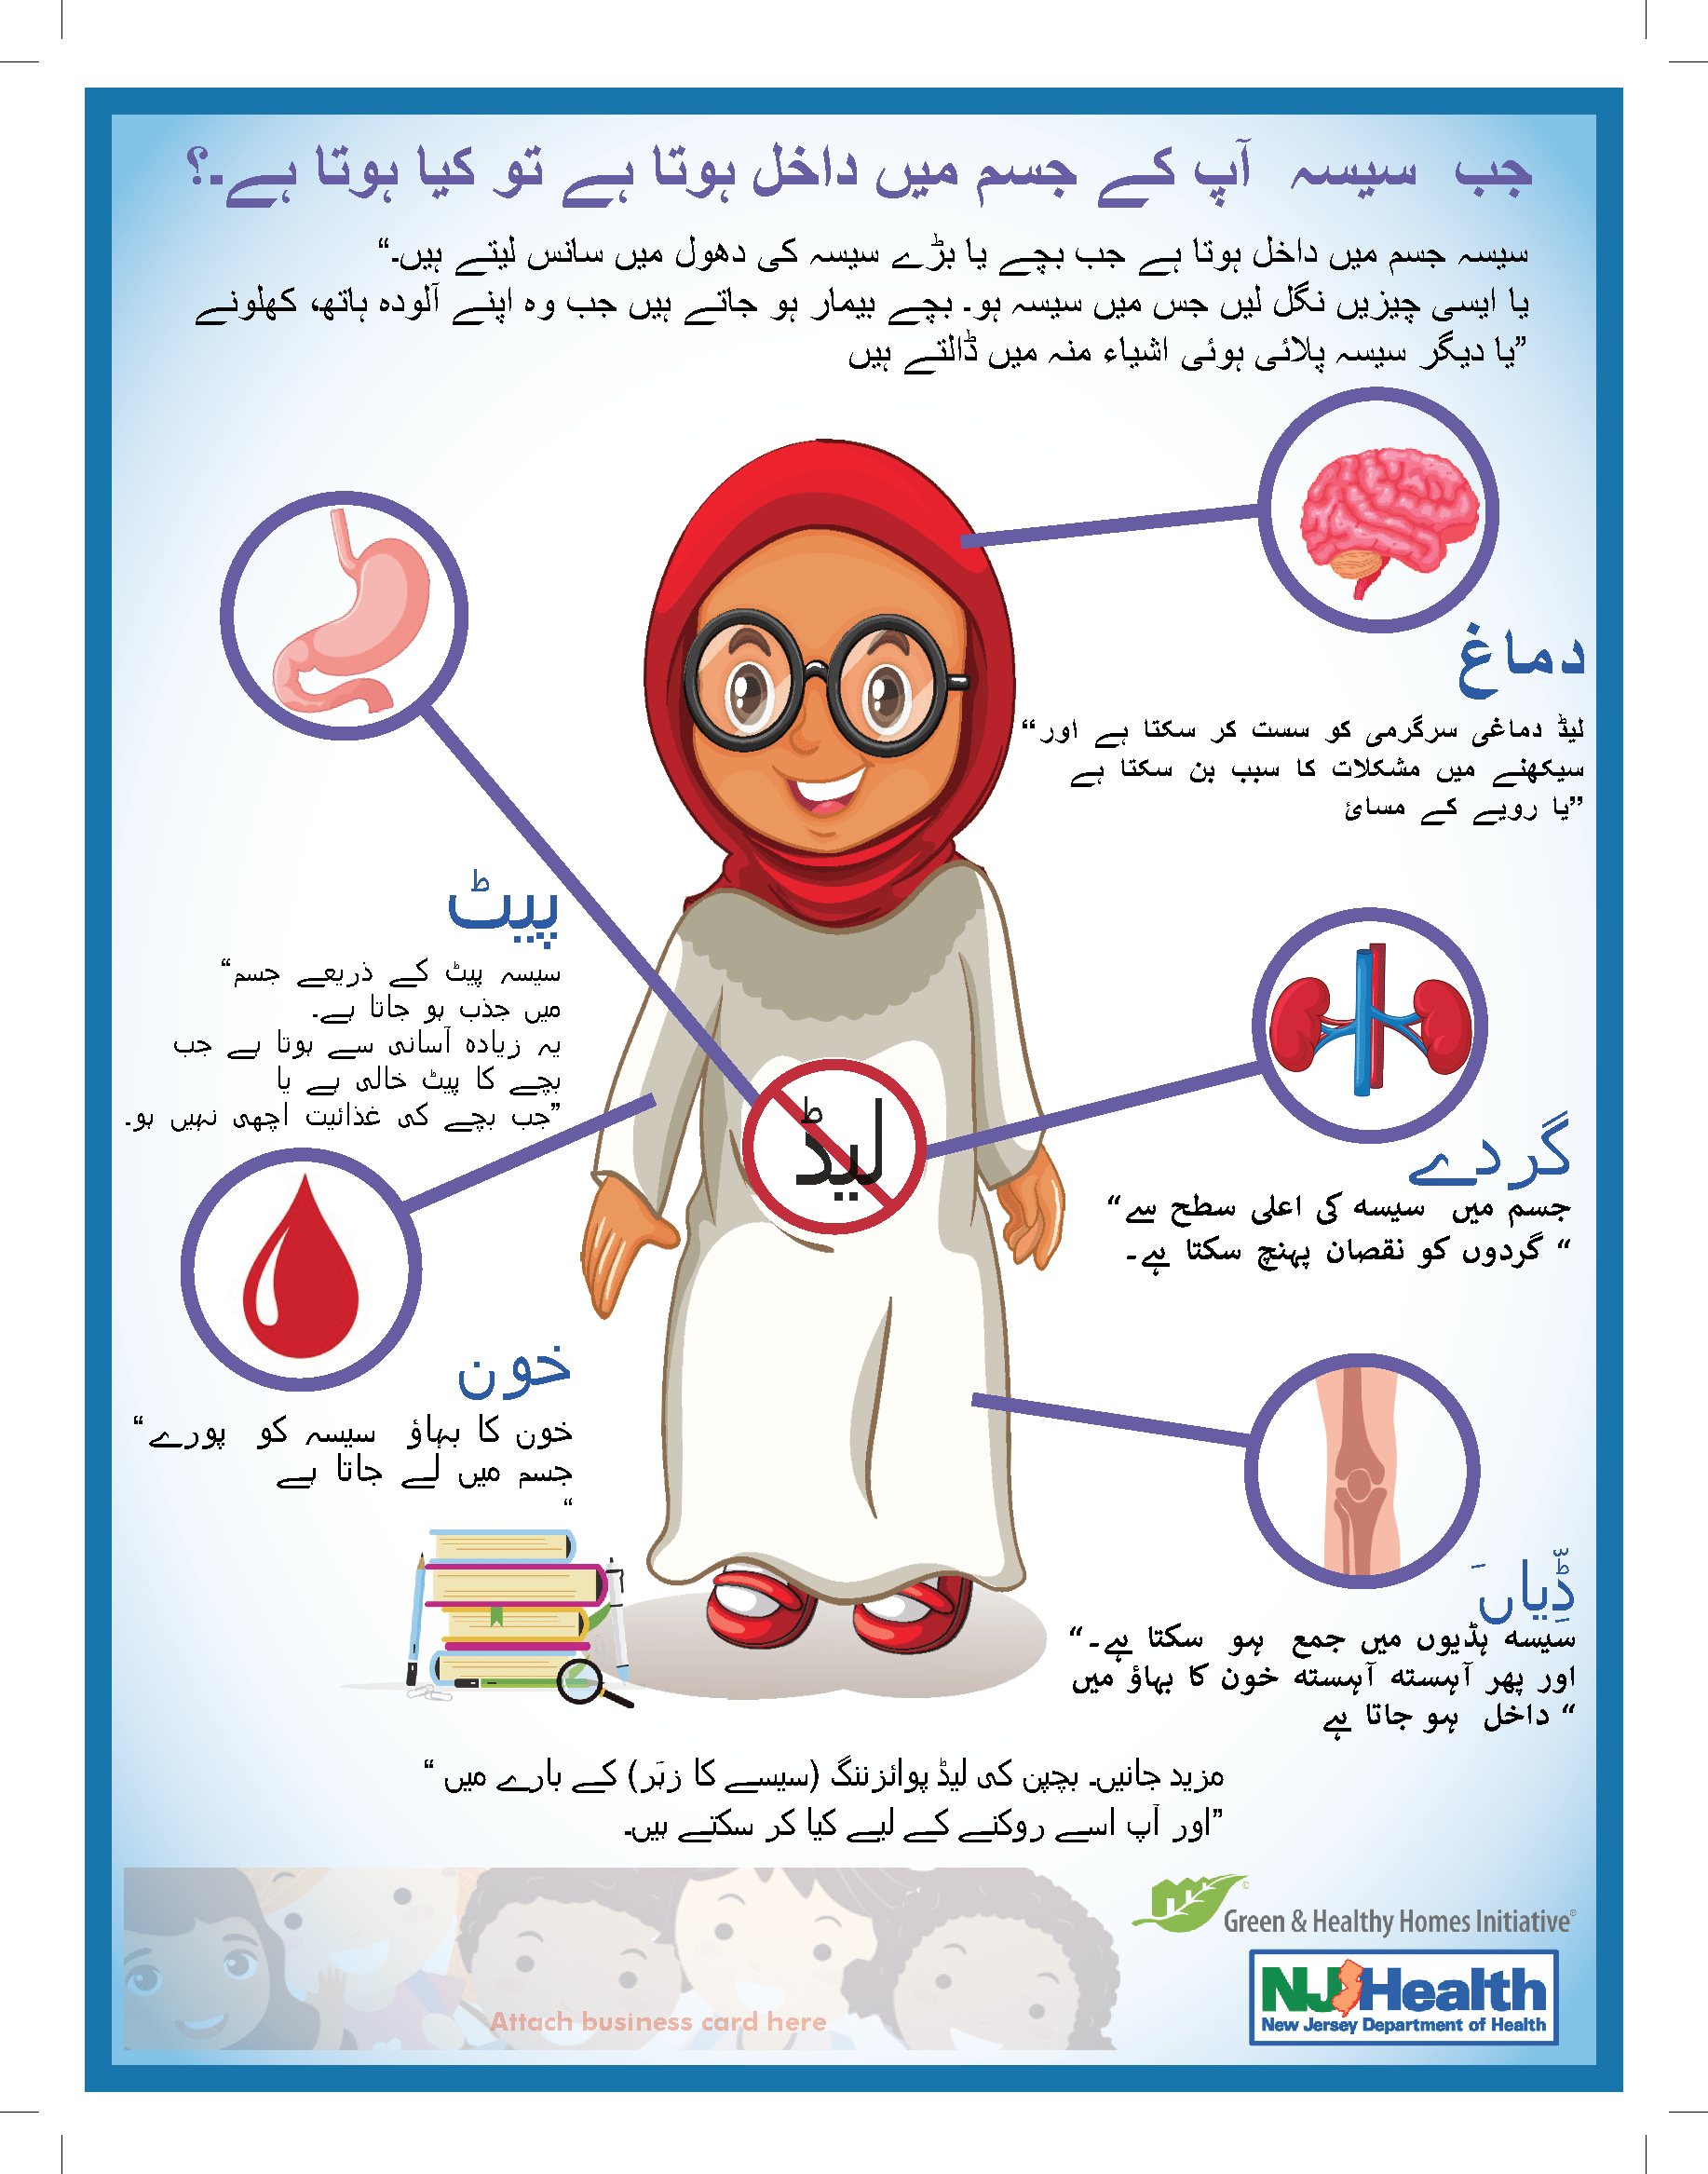 Image of a young girl surrounded by images illustrating the effects of lead on the body.